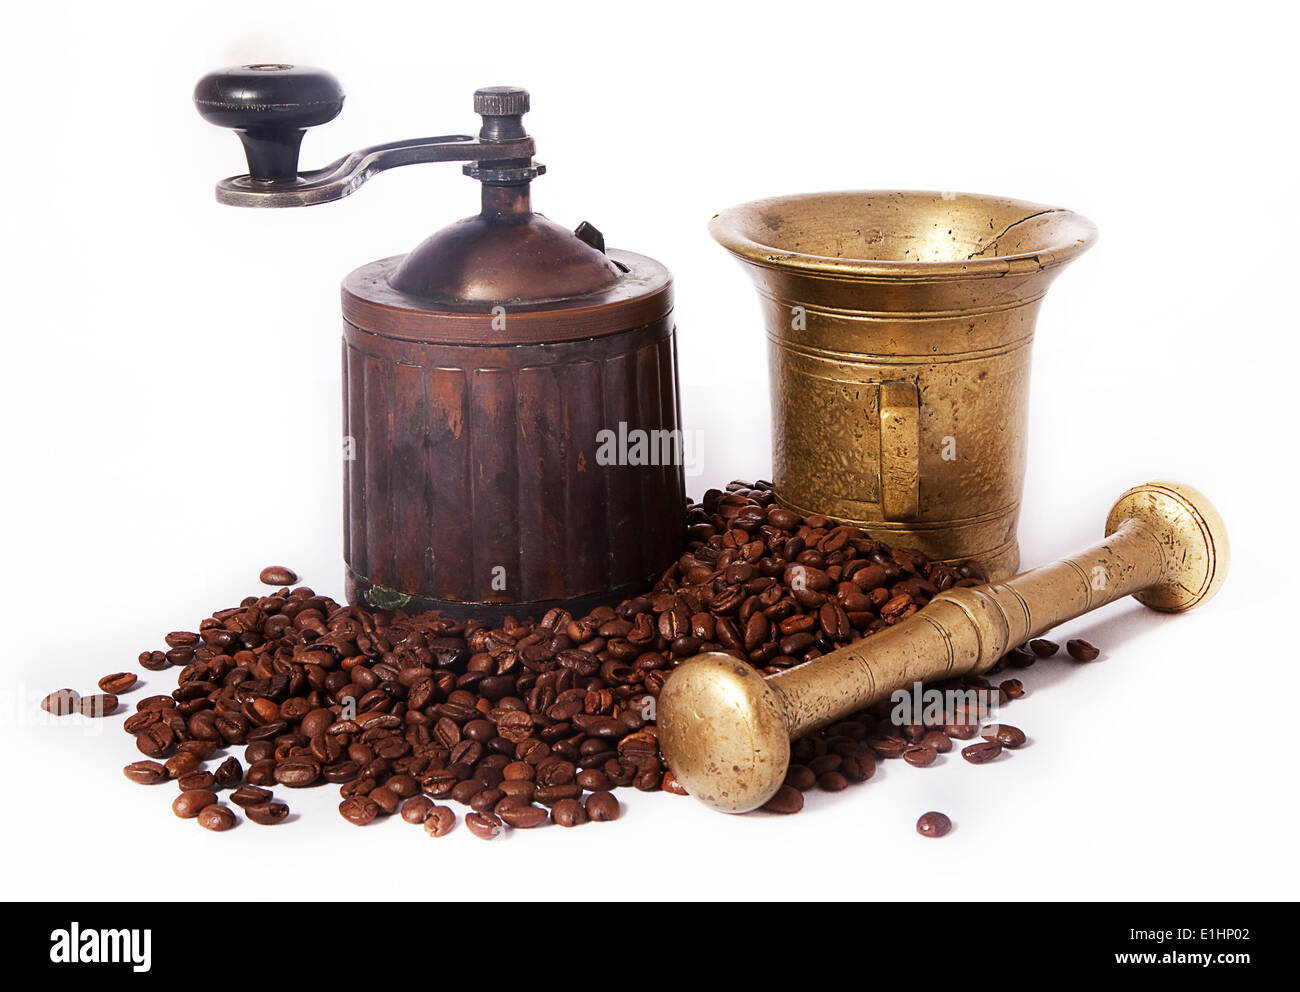 Old-fashioned brazen coffee Grinder and roasted coffee beans - series of photos Stock Photo